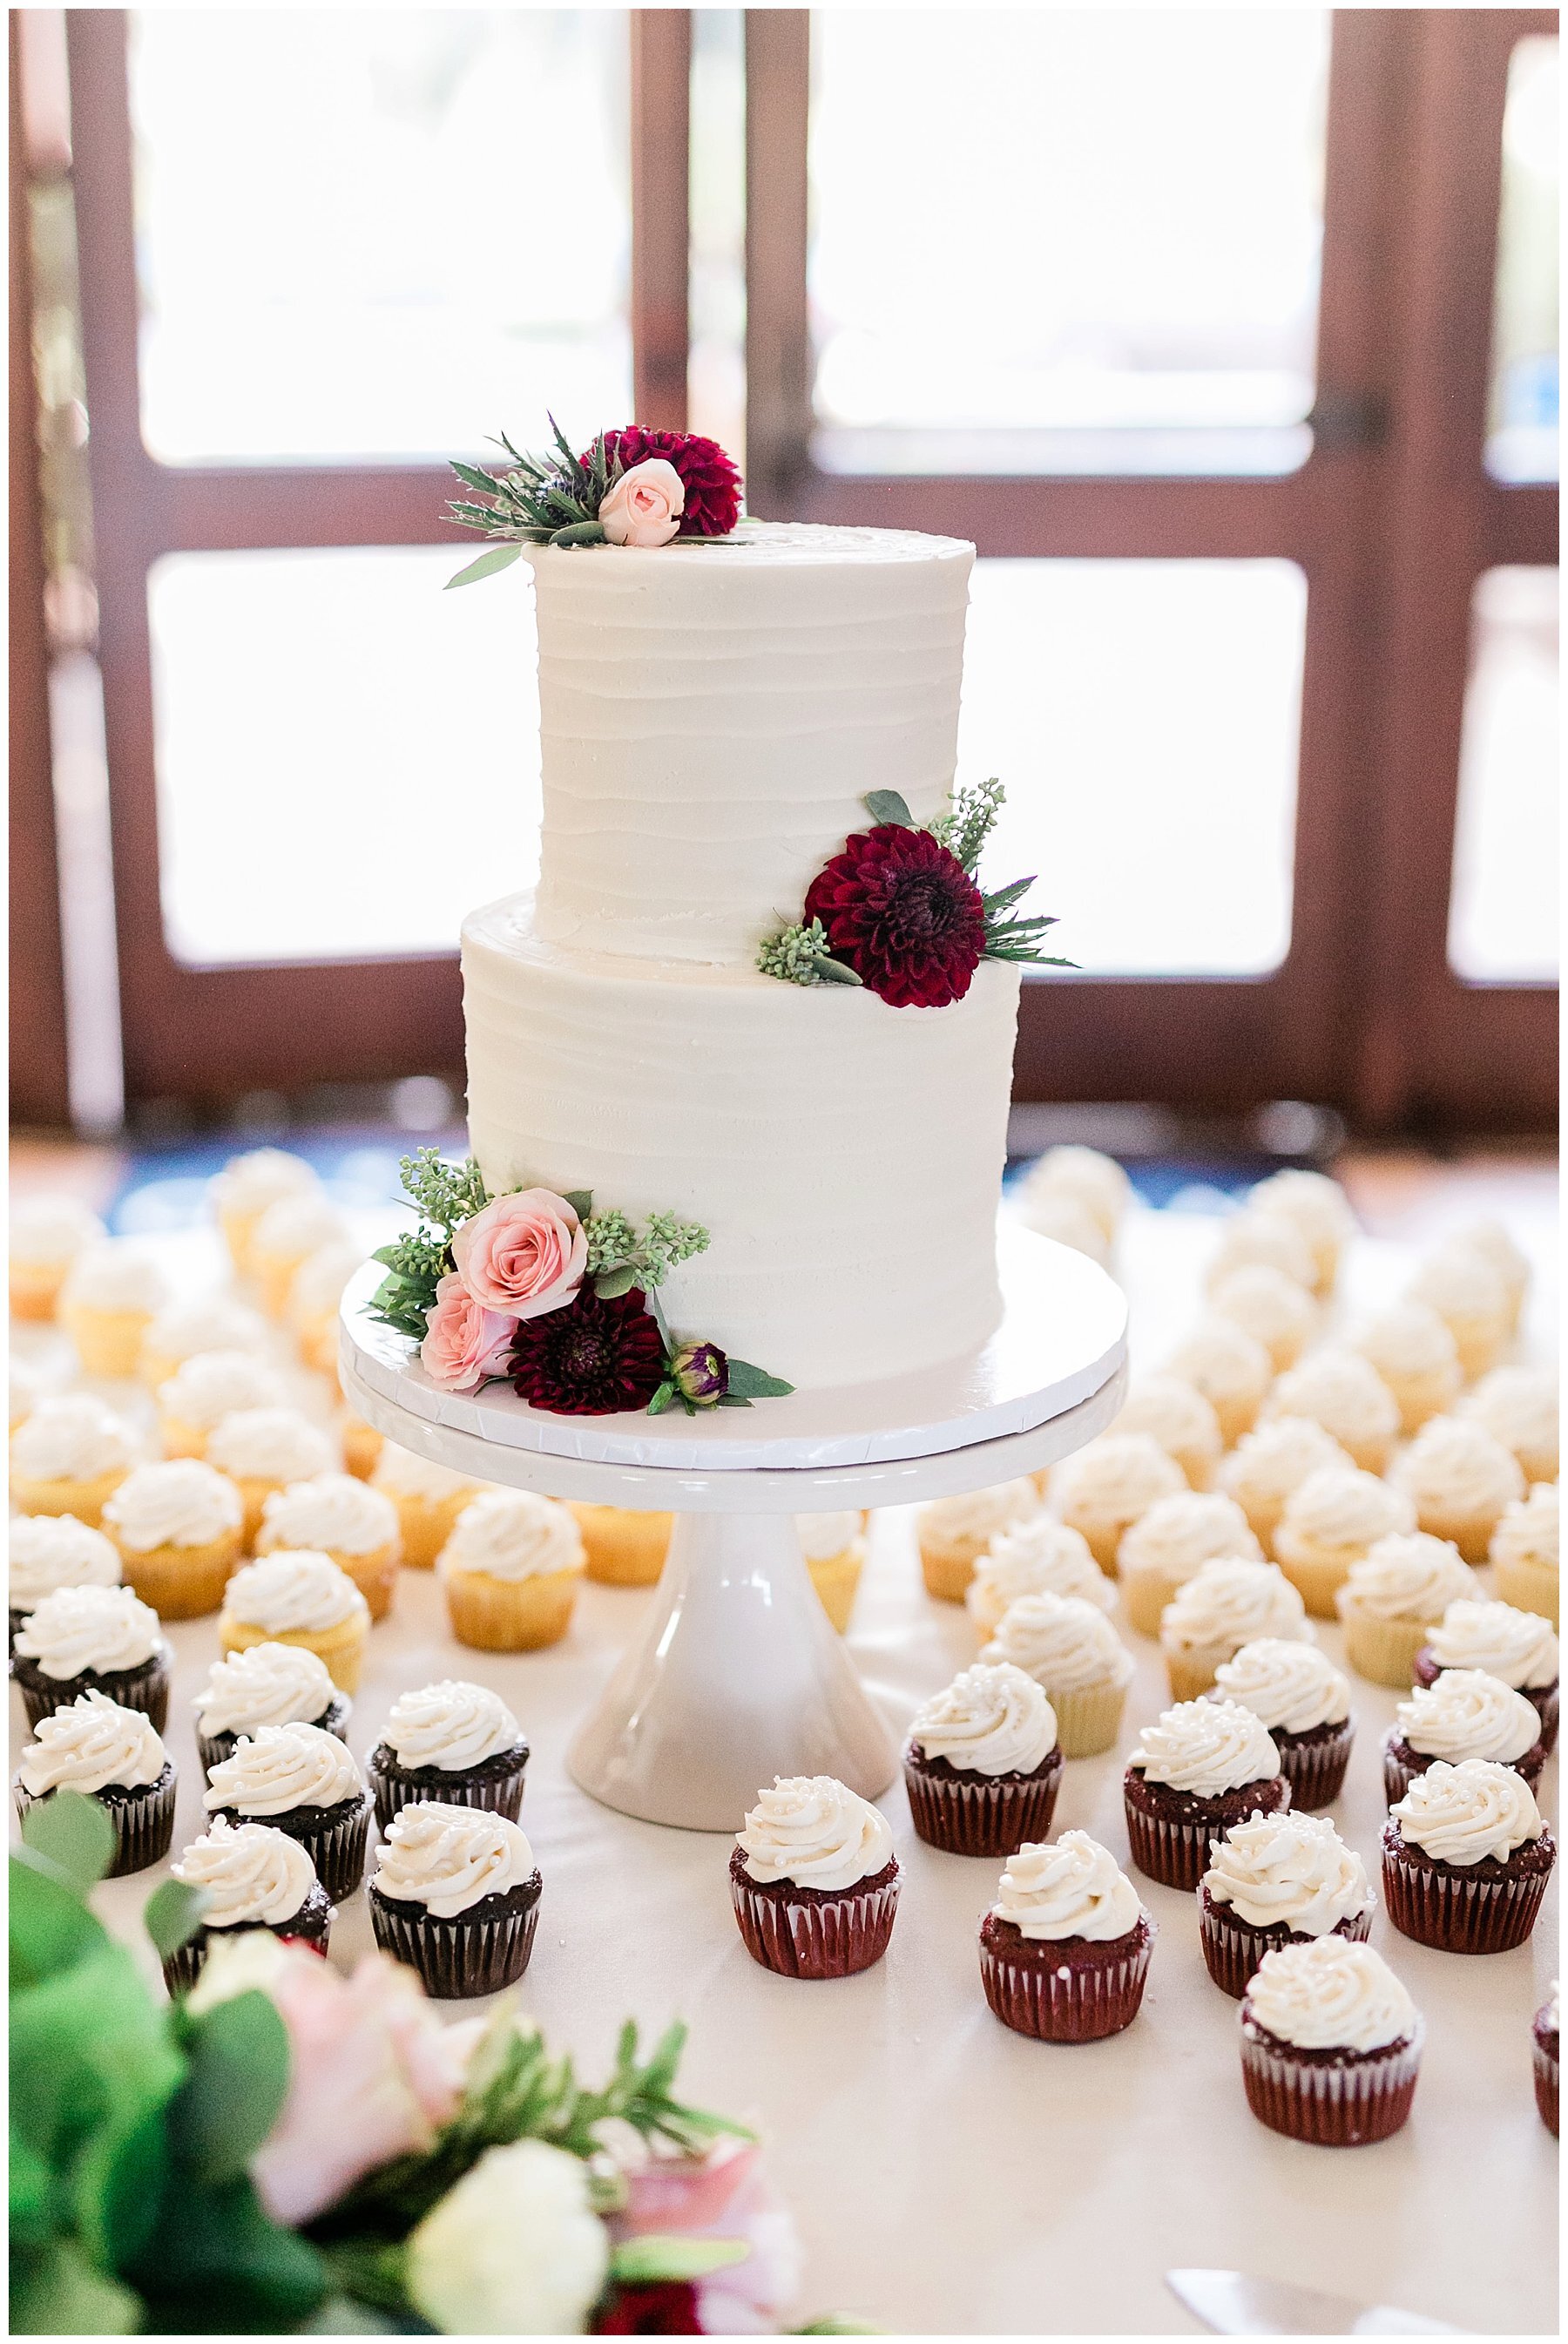  dessert table with wedding cake decorated with maroon flowers 